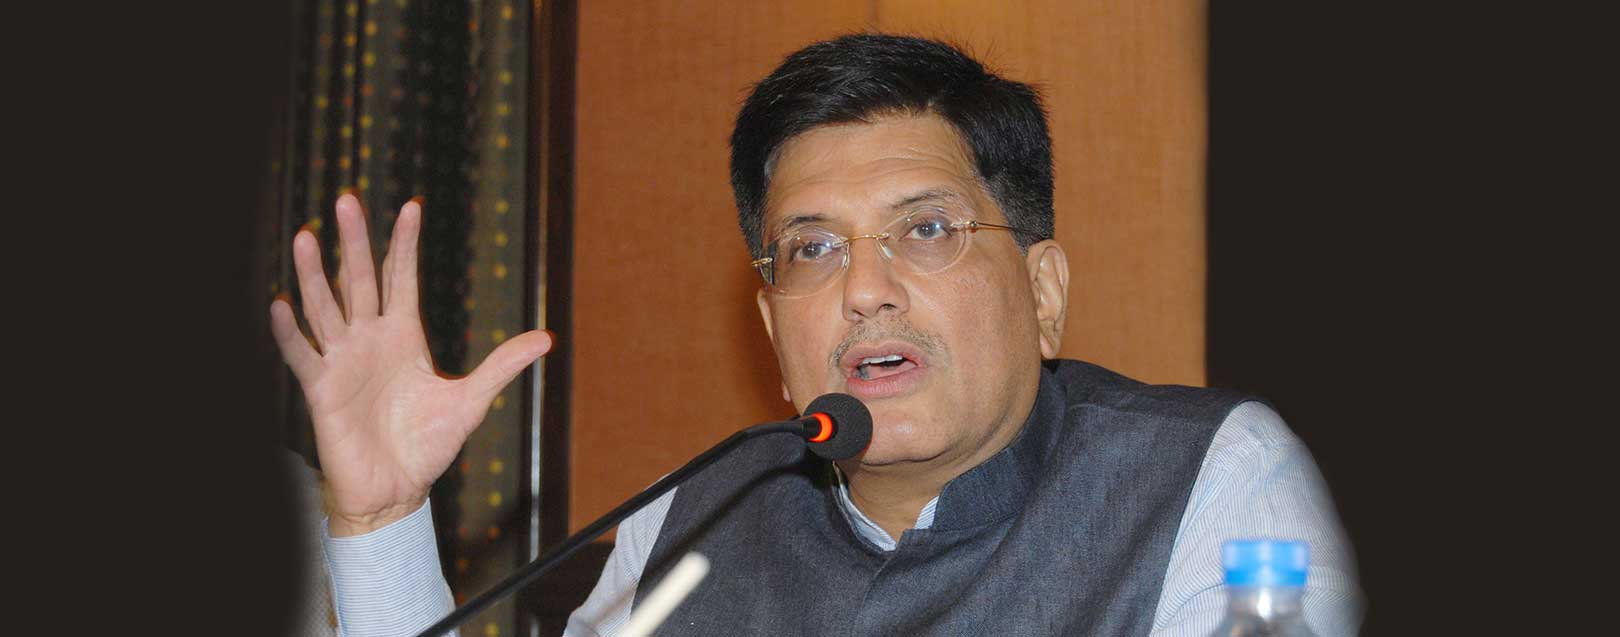 Govt in talks with US over solar dispute: Goyal